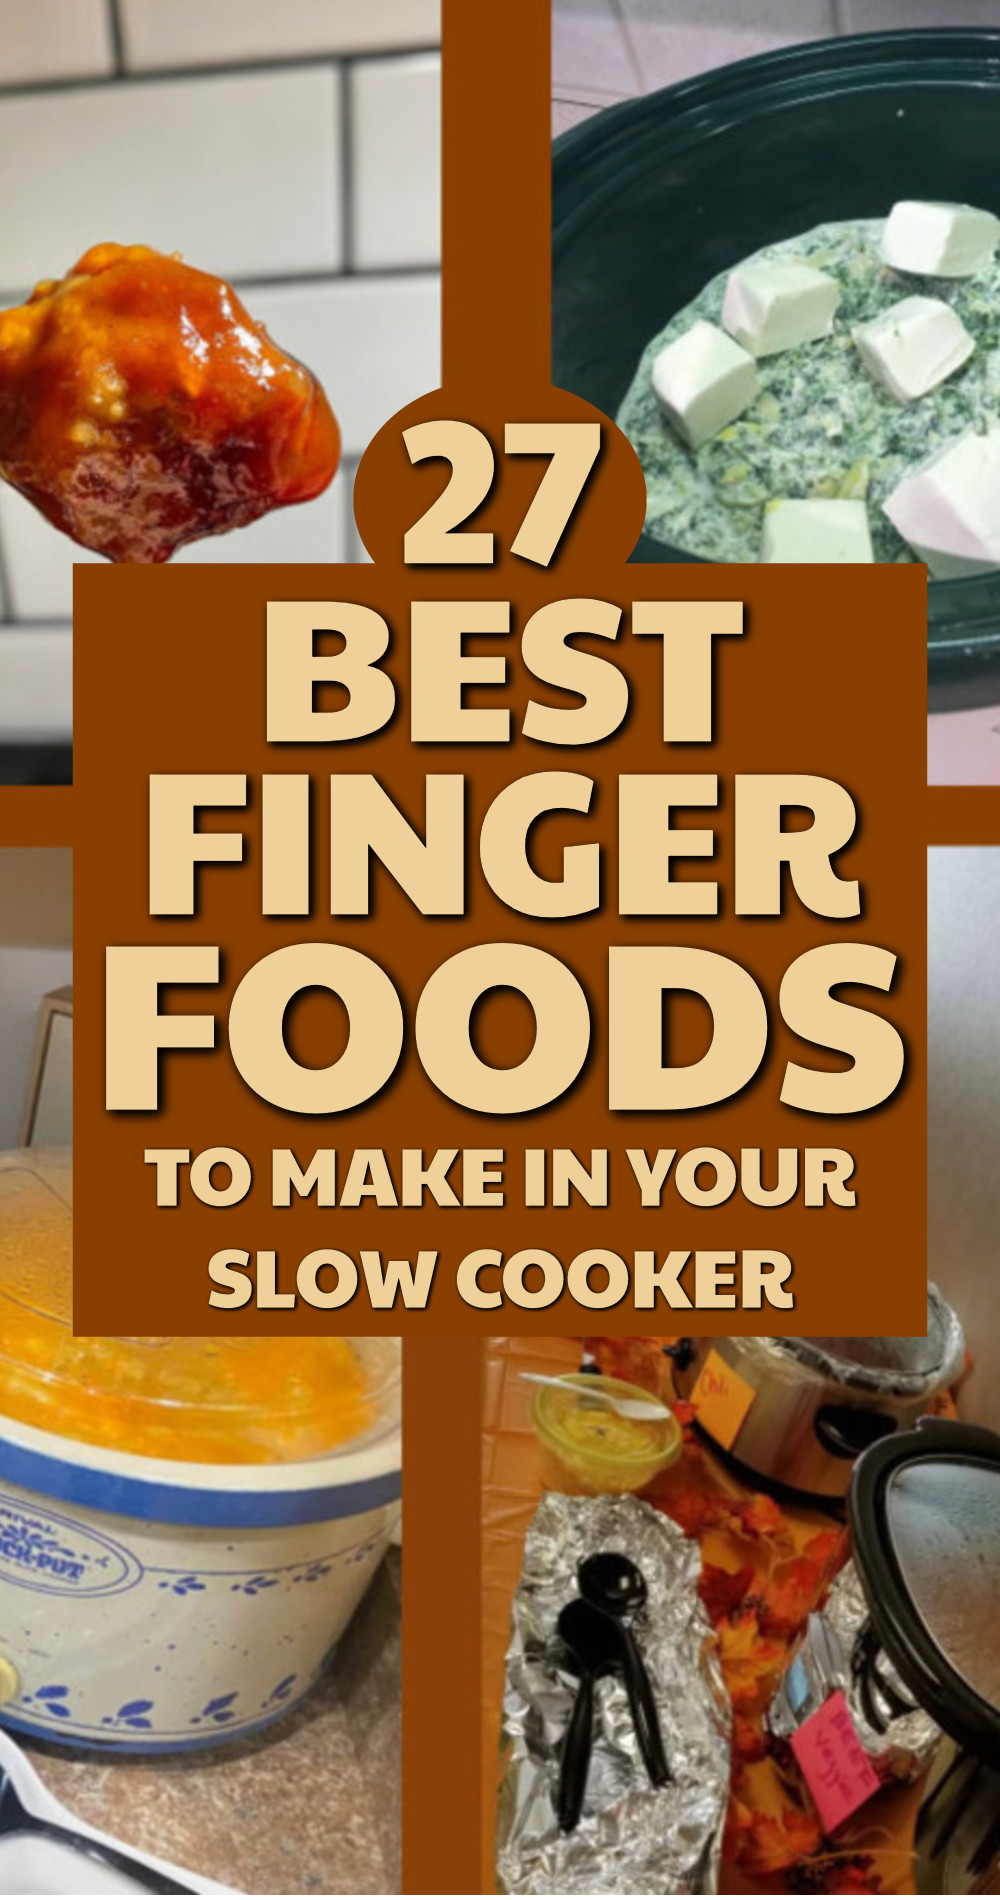 Best finger foods to make in your slow cooker